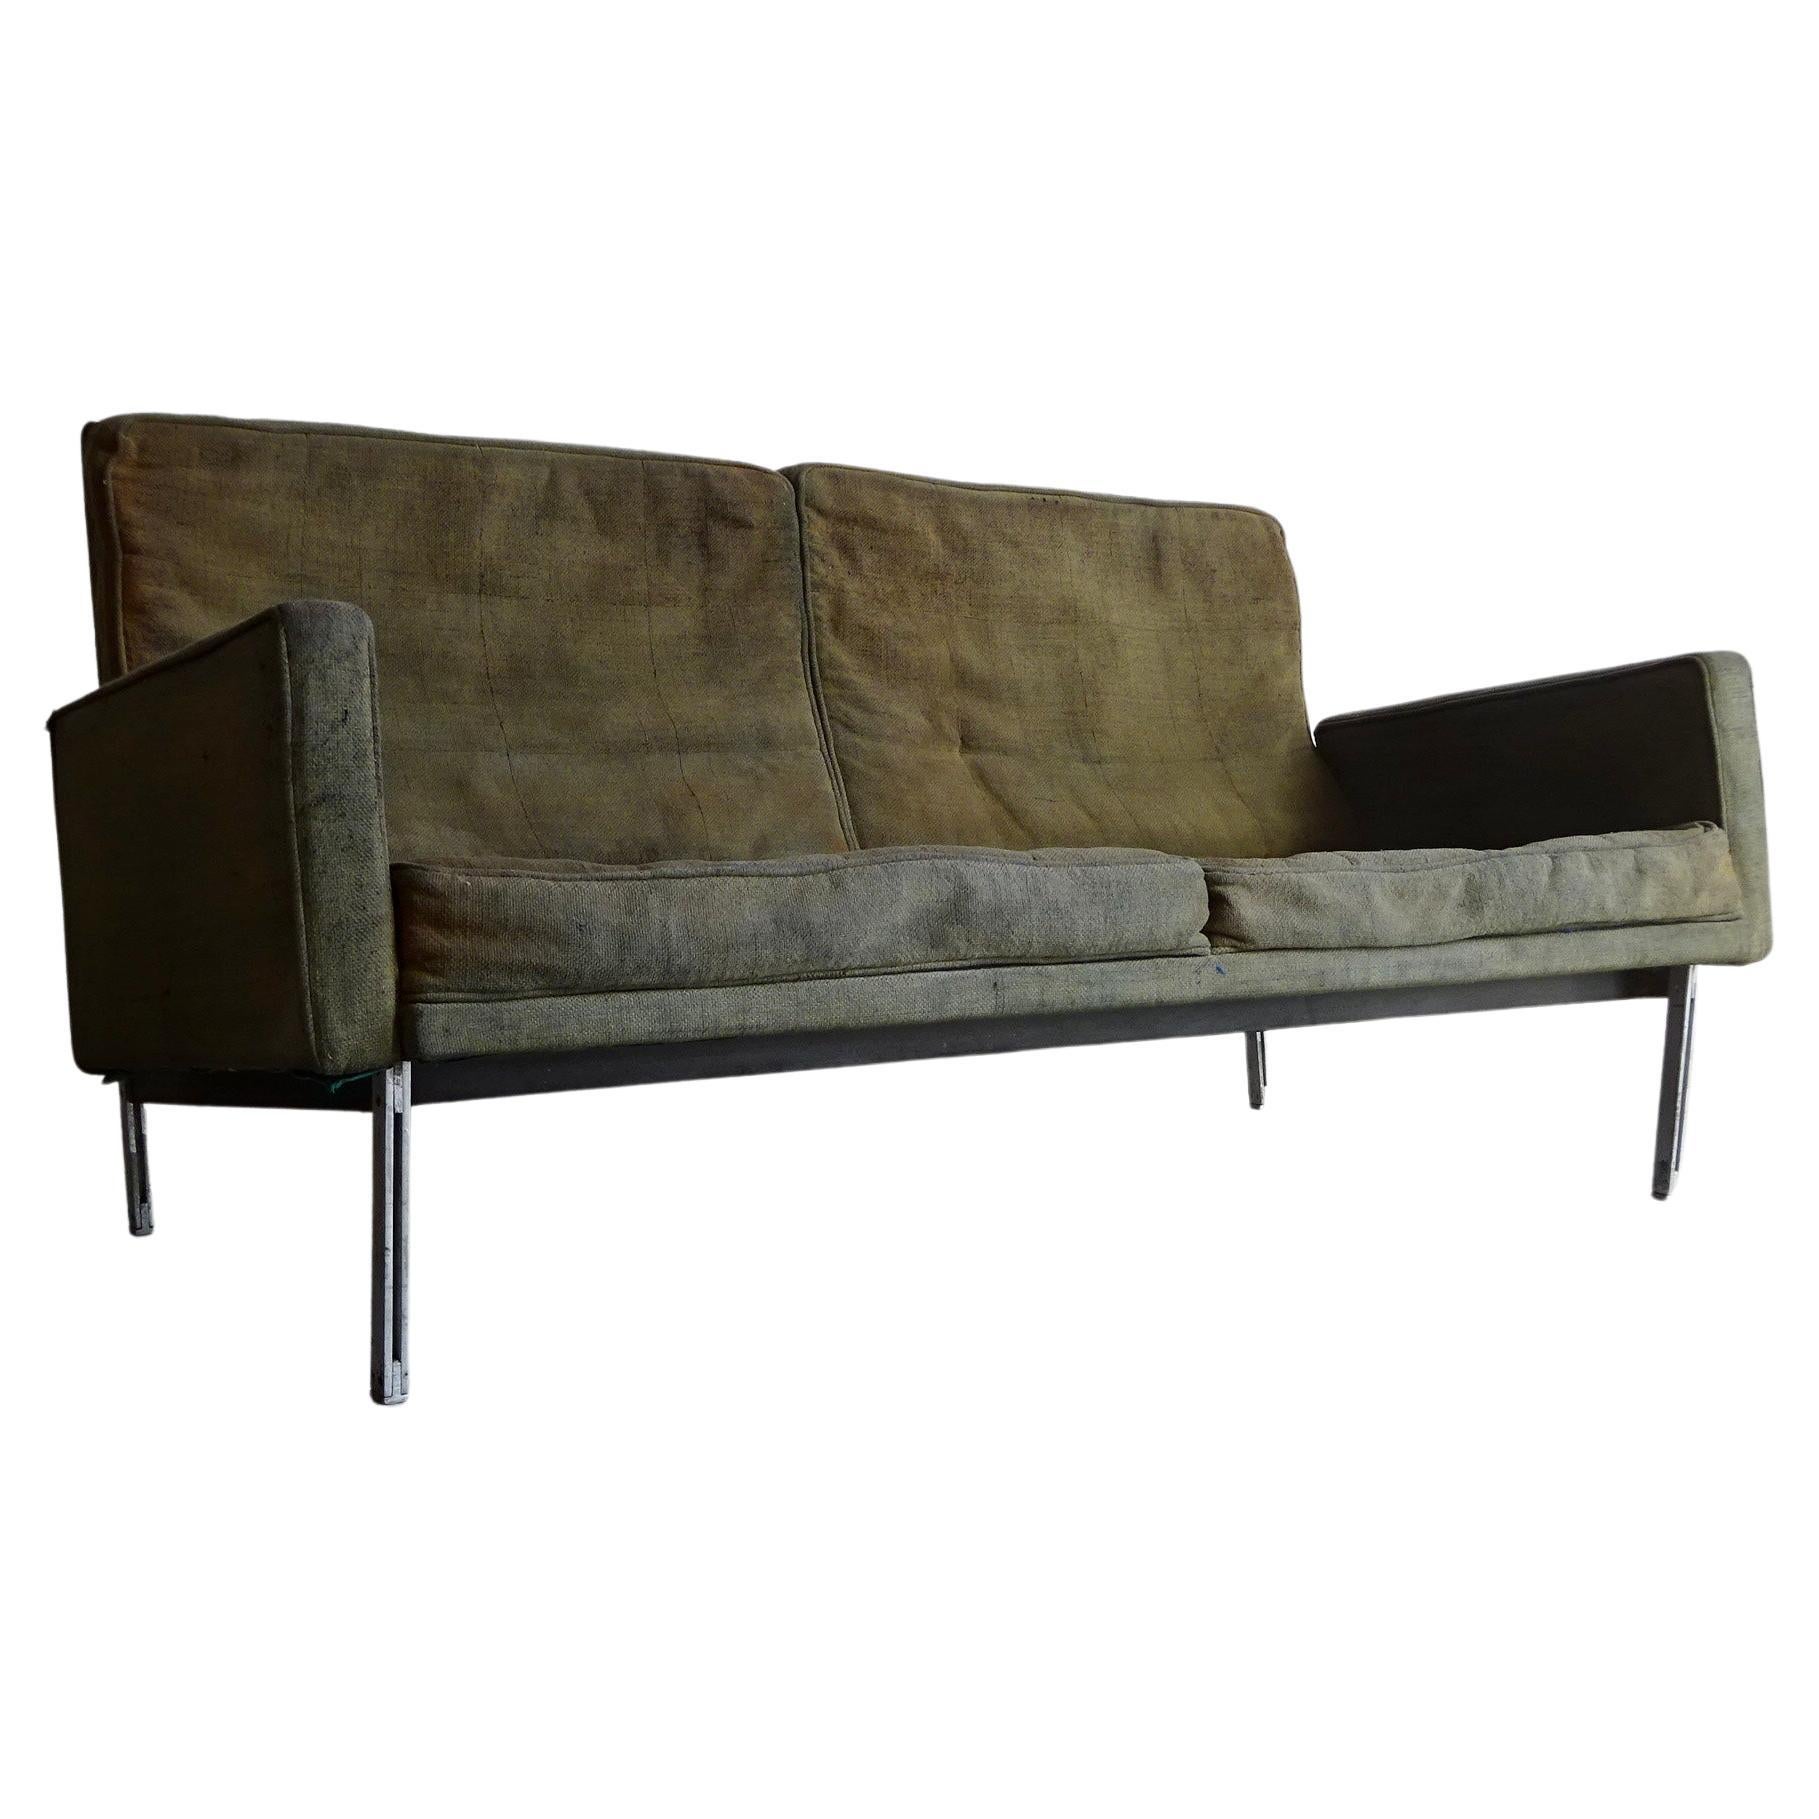 Parallel Bar Sofa, Model 57, by Florence Knol, USA, 1960s. For Sale